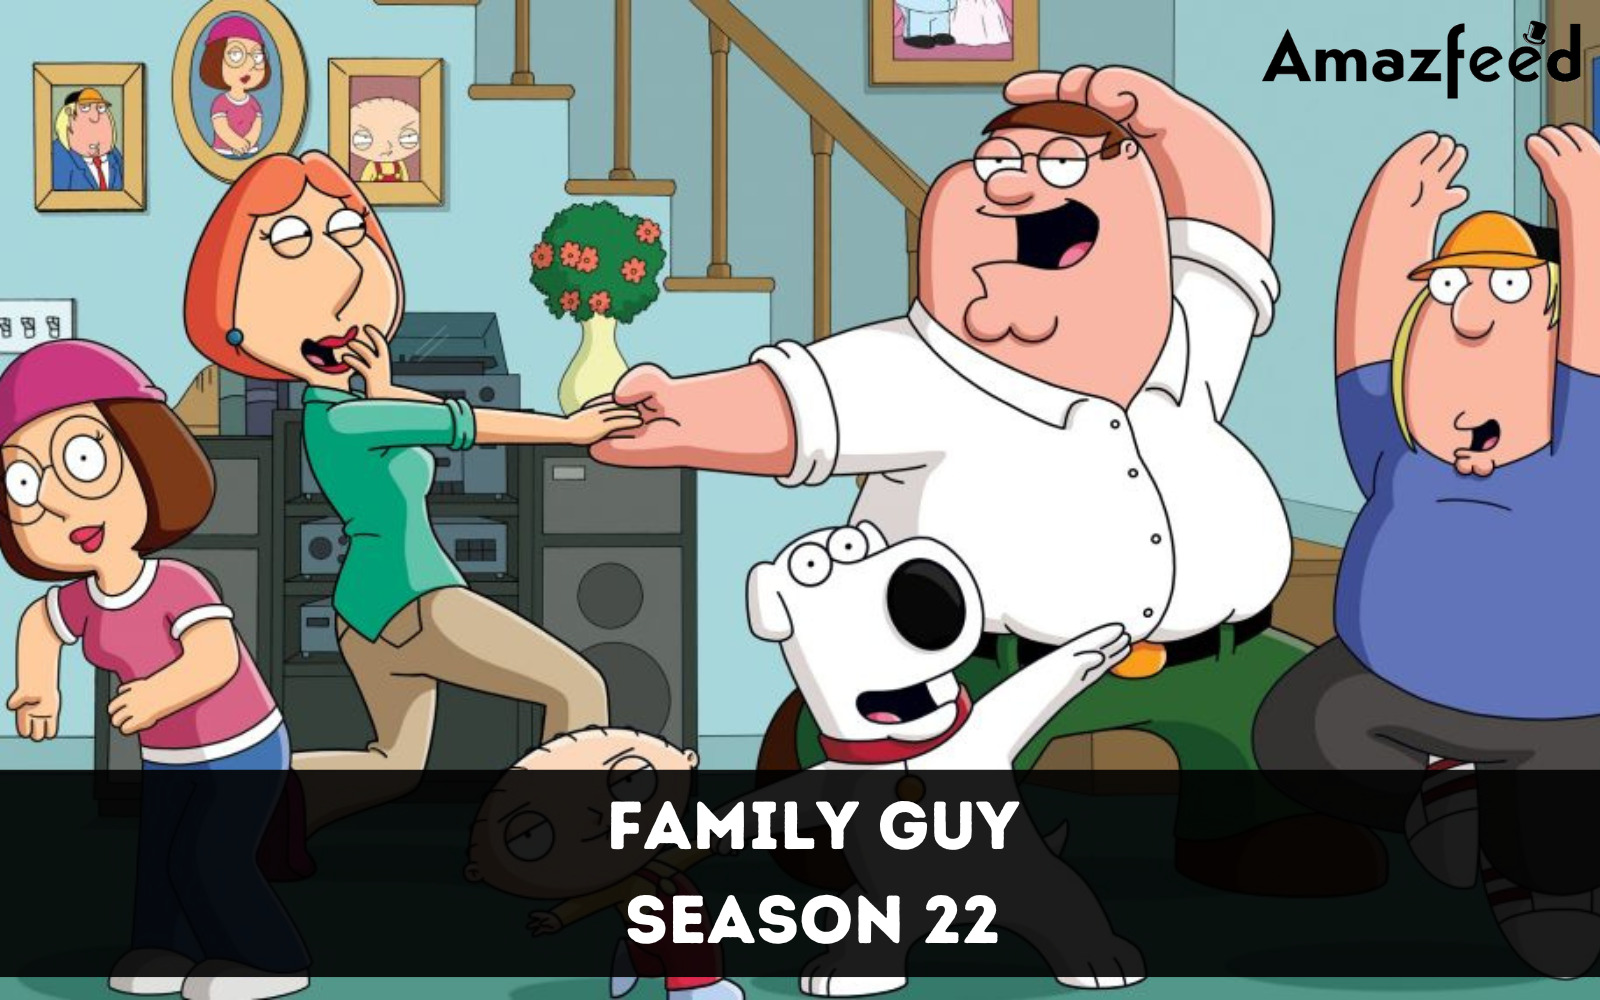 Is There Any Trailer For Family Guy Season 22